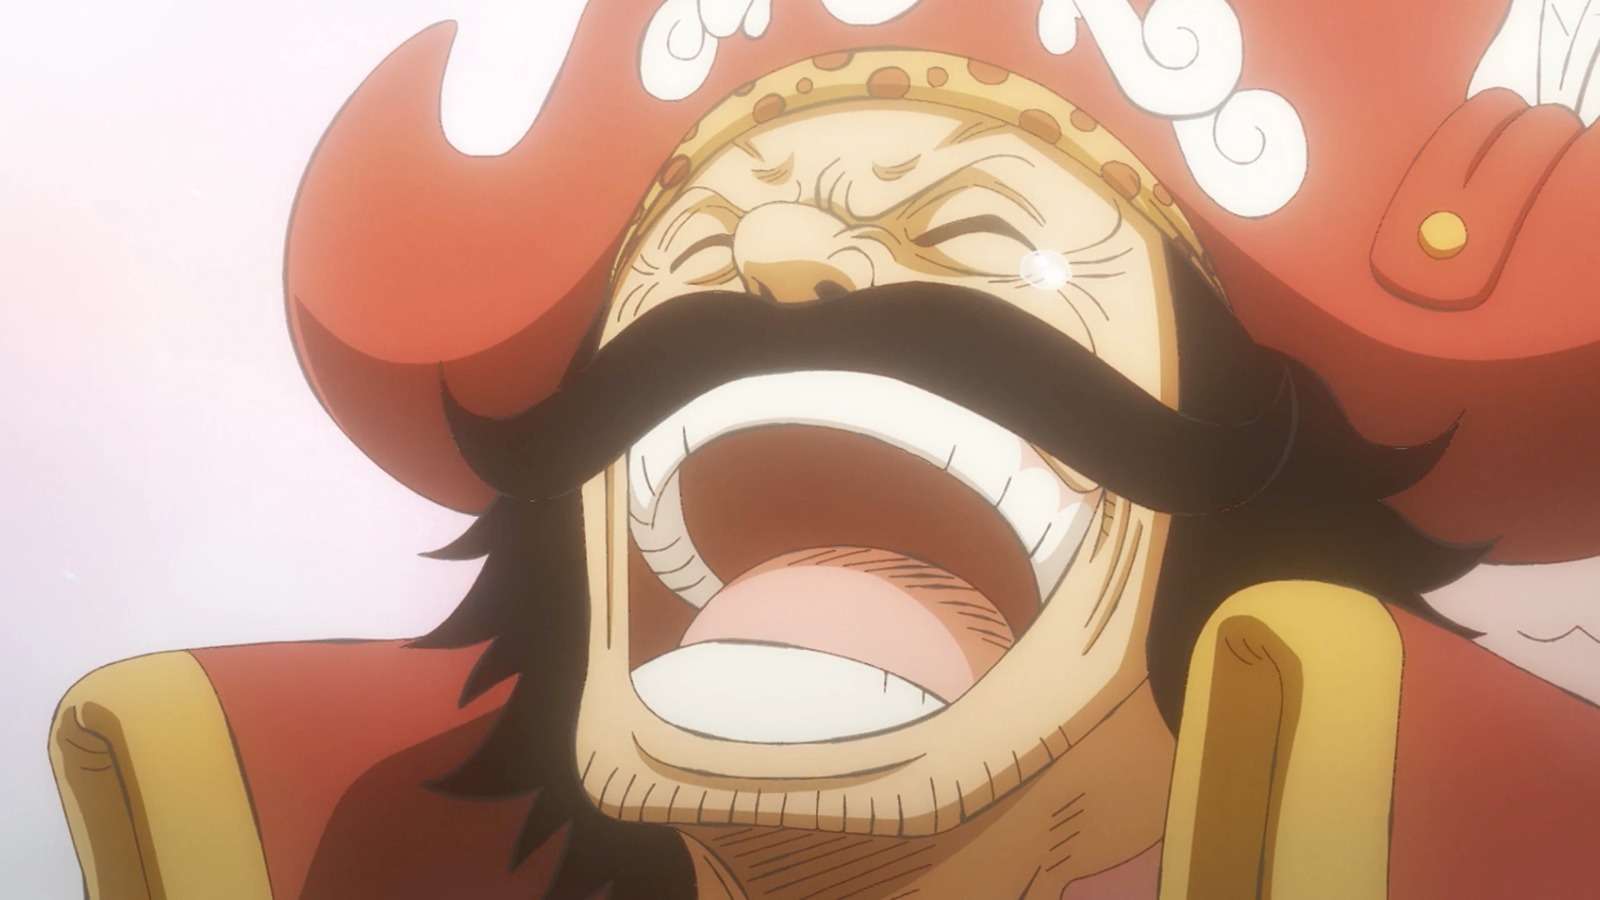 An image of Roger in Laugh Tale of One Piece